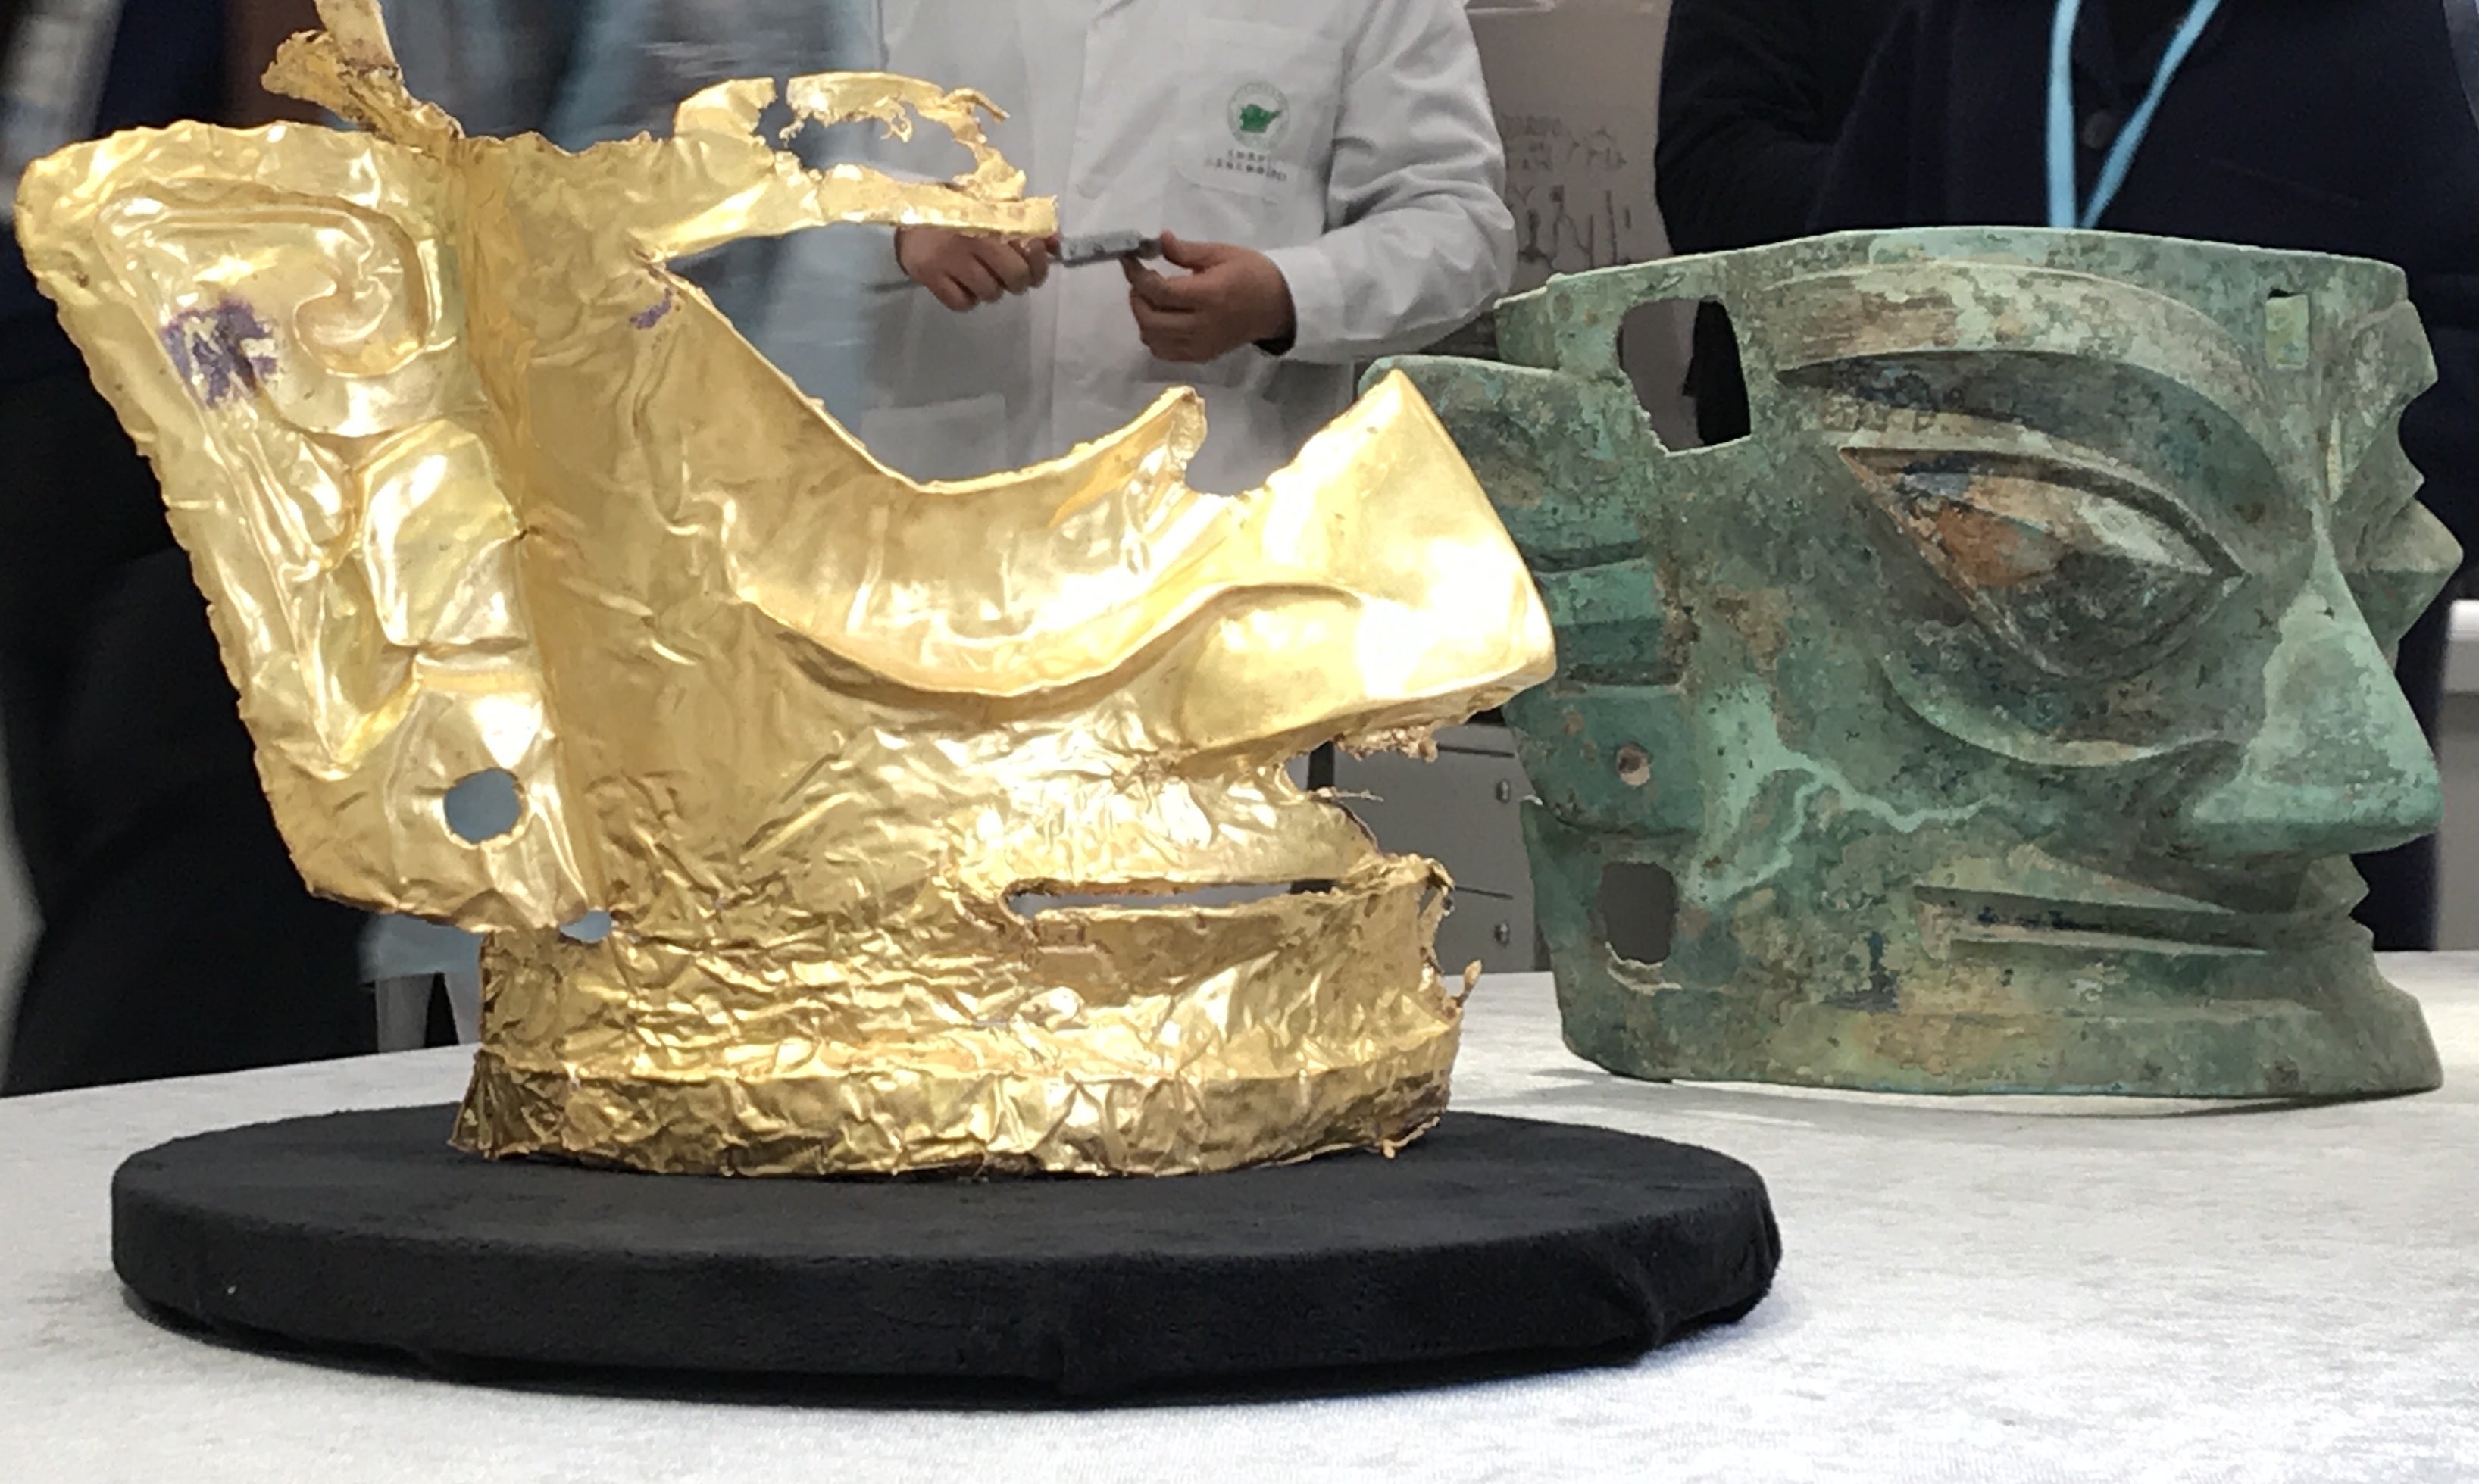 The gold mask has been found along with 500 relics dating back about 3,000 years, unearthed at the renowned Sanxingdui Ruins site